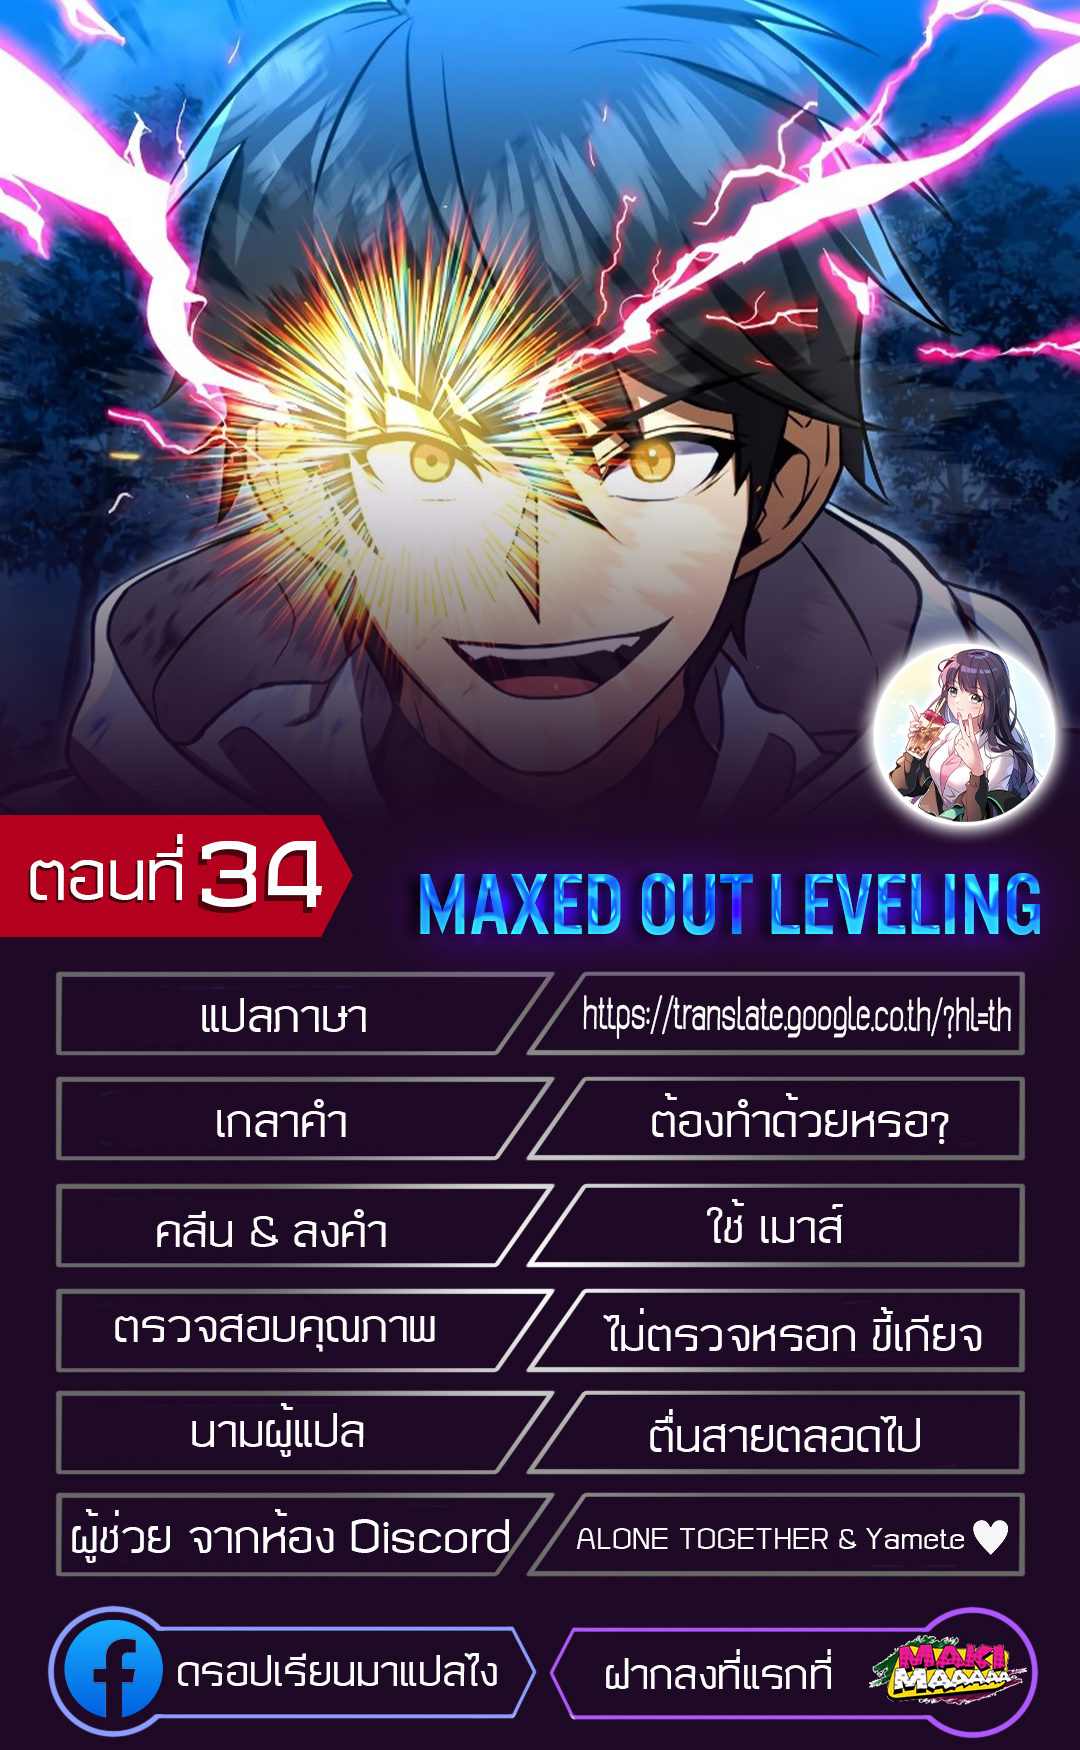 Maxed Out Leveling 34 (1)